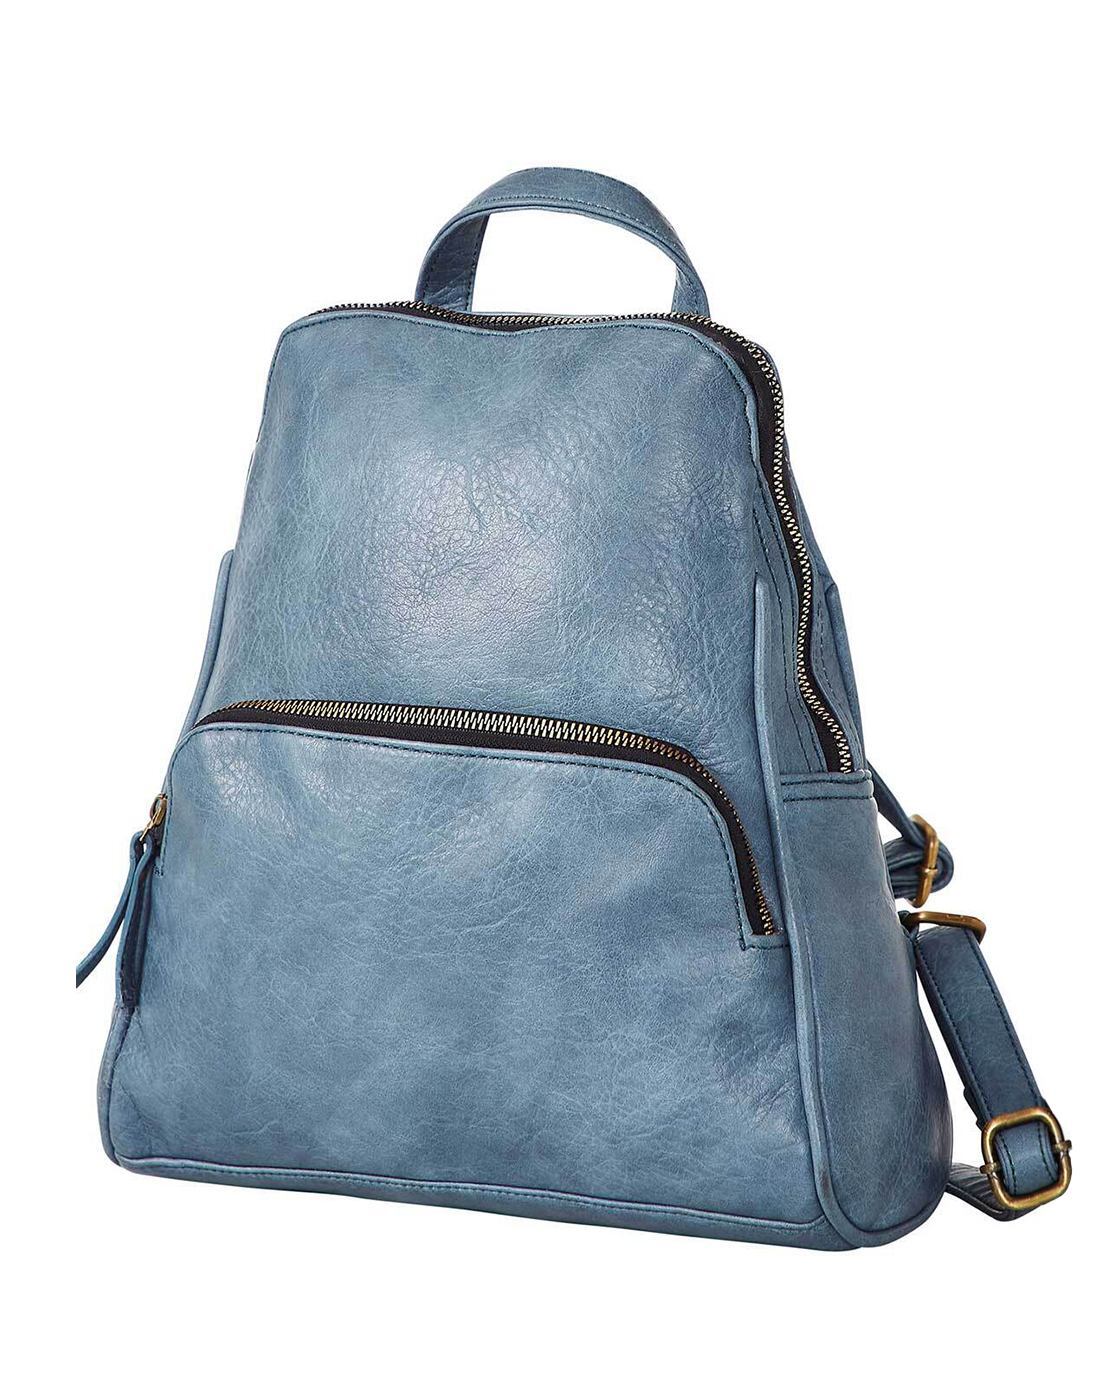 McKLEIN ARCHES 11.5 in. Aqua Blue Top Grain Cowhide Leather Bow Backpack  99728 - The Home Depot